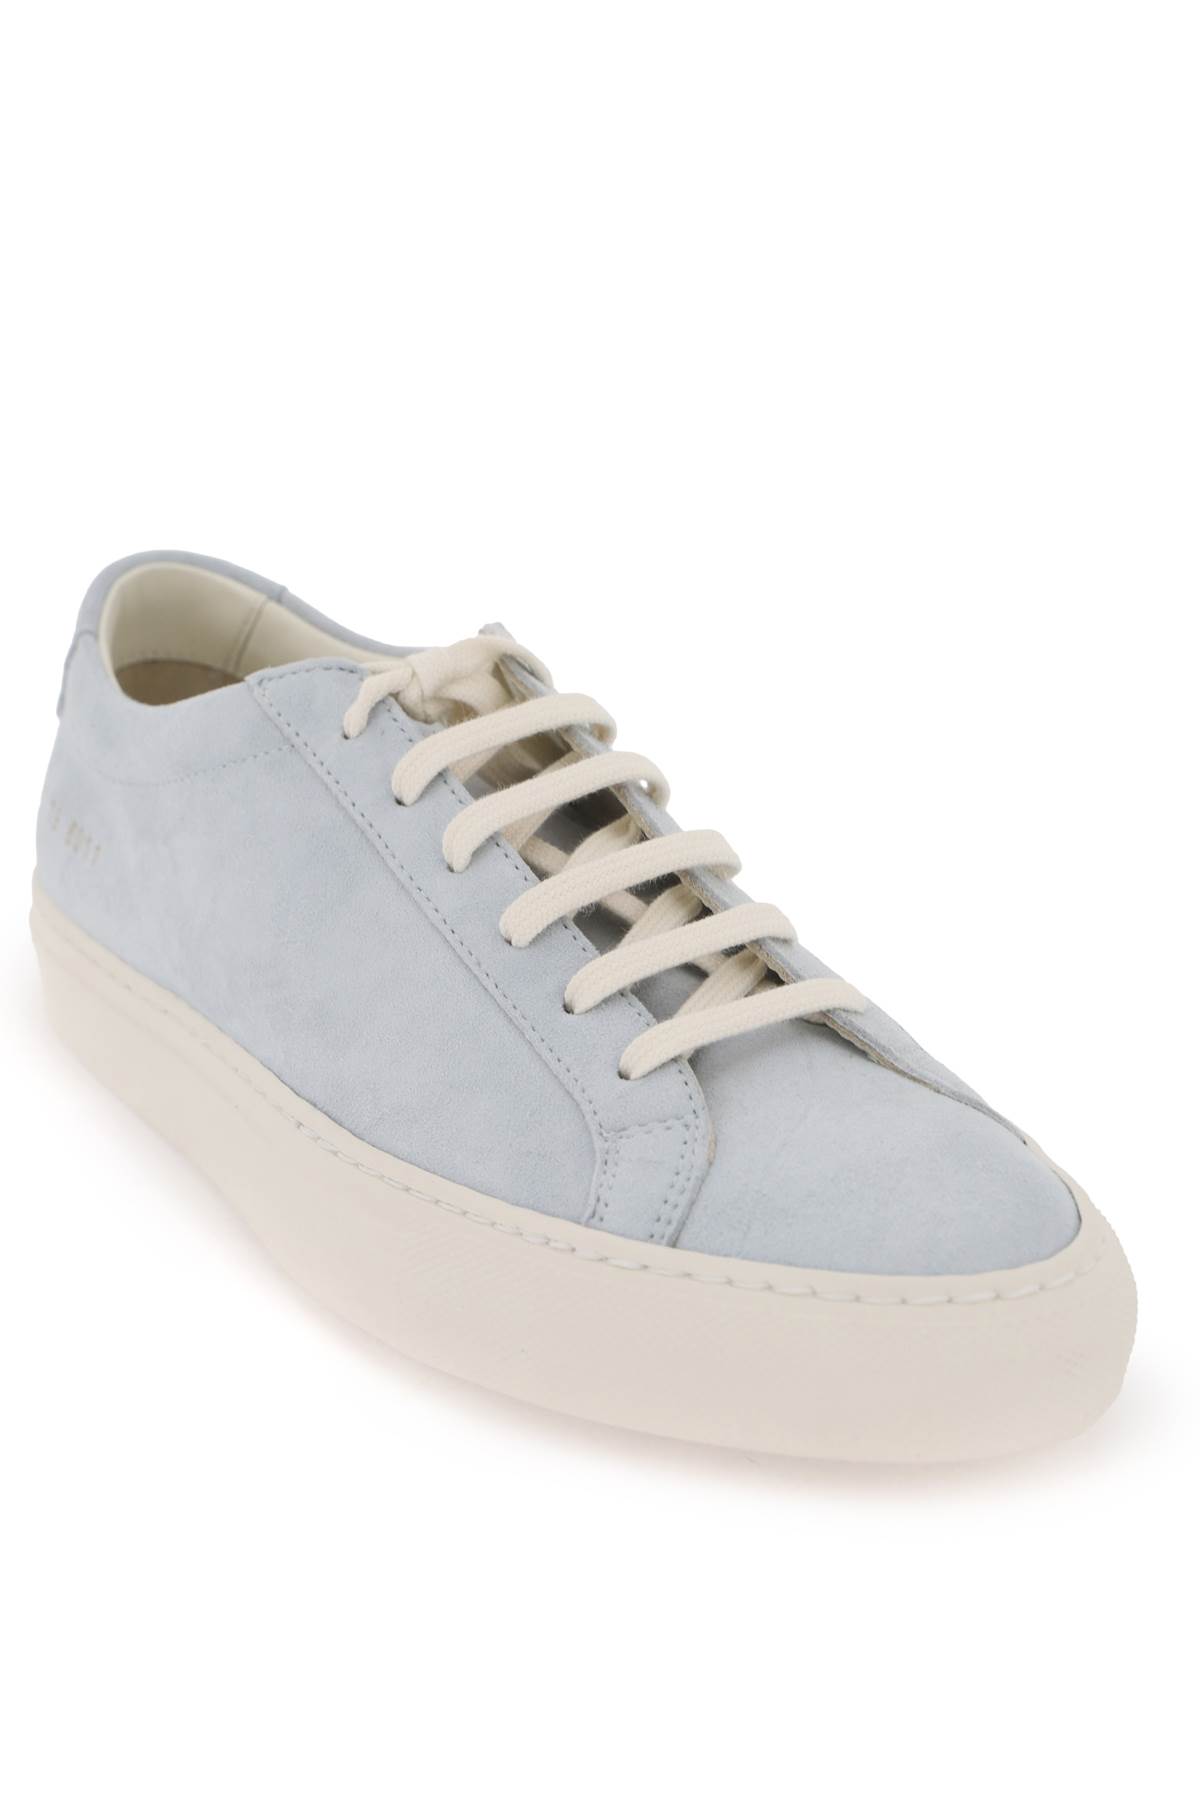 Shop Common Projects Suede Original Achilles Sneakers In Baby Blue (light Blue)